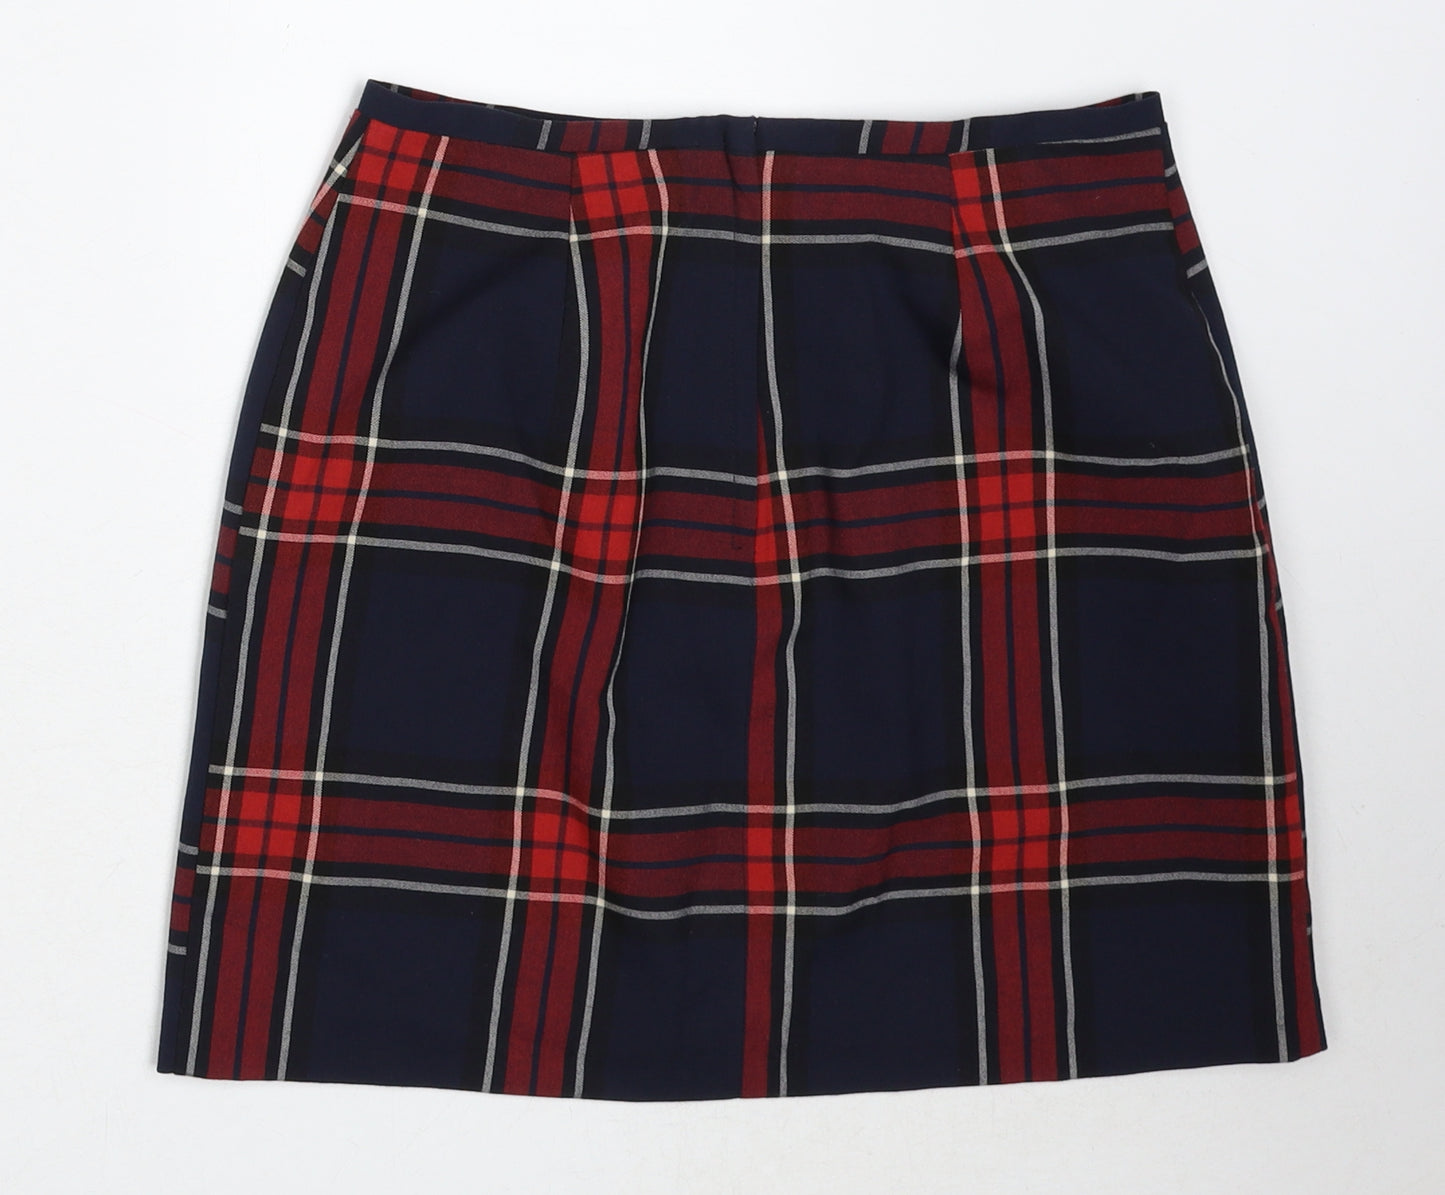 New Look Womens Multicoloured Plaid Polyester A-Line Skirt Size 8 Zip